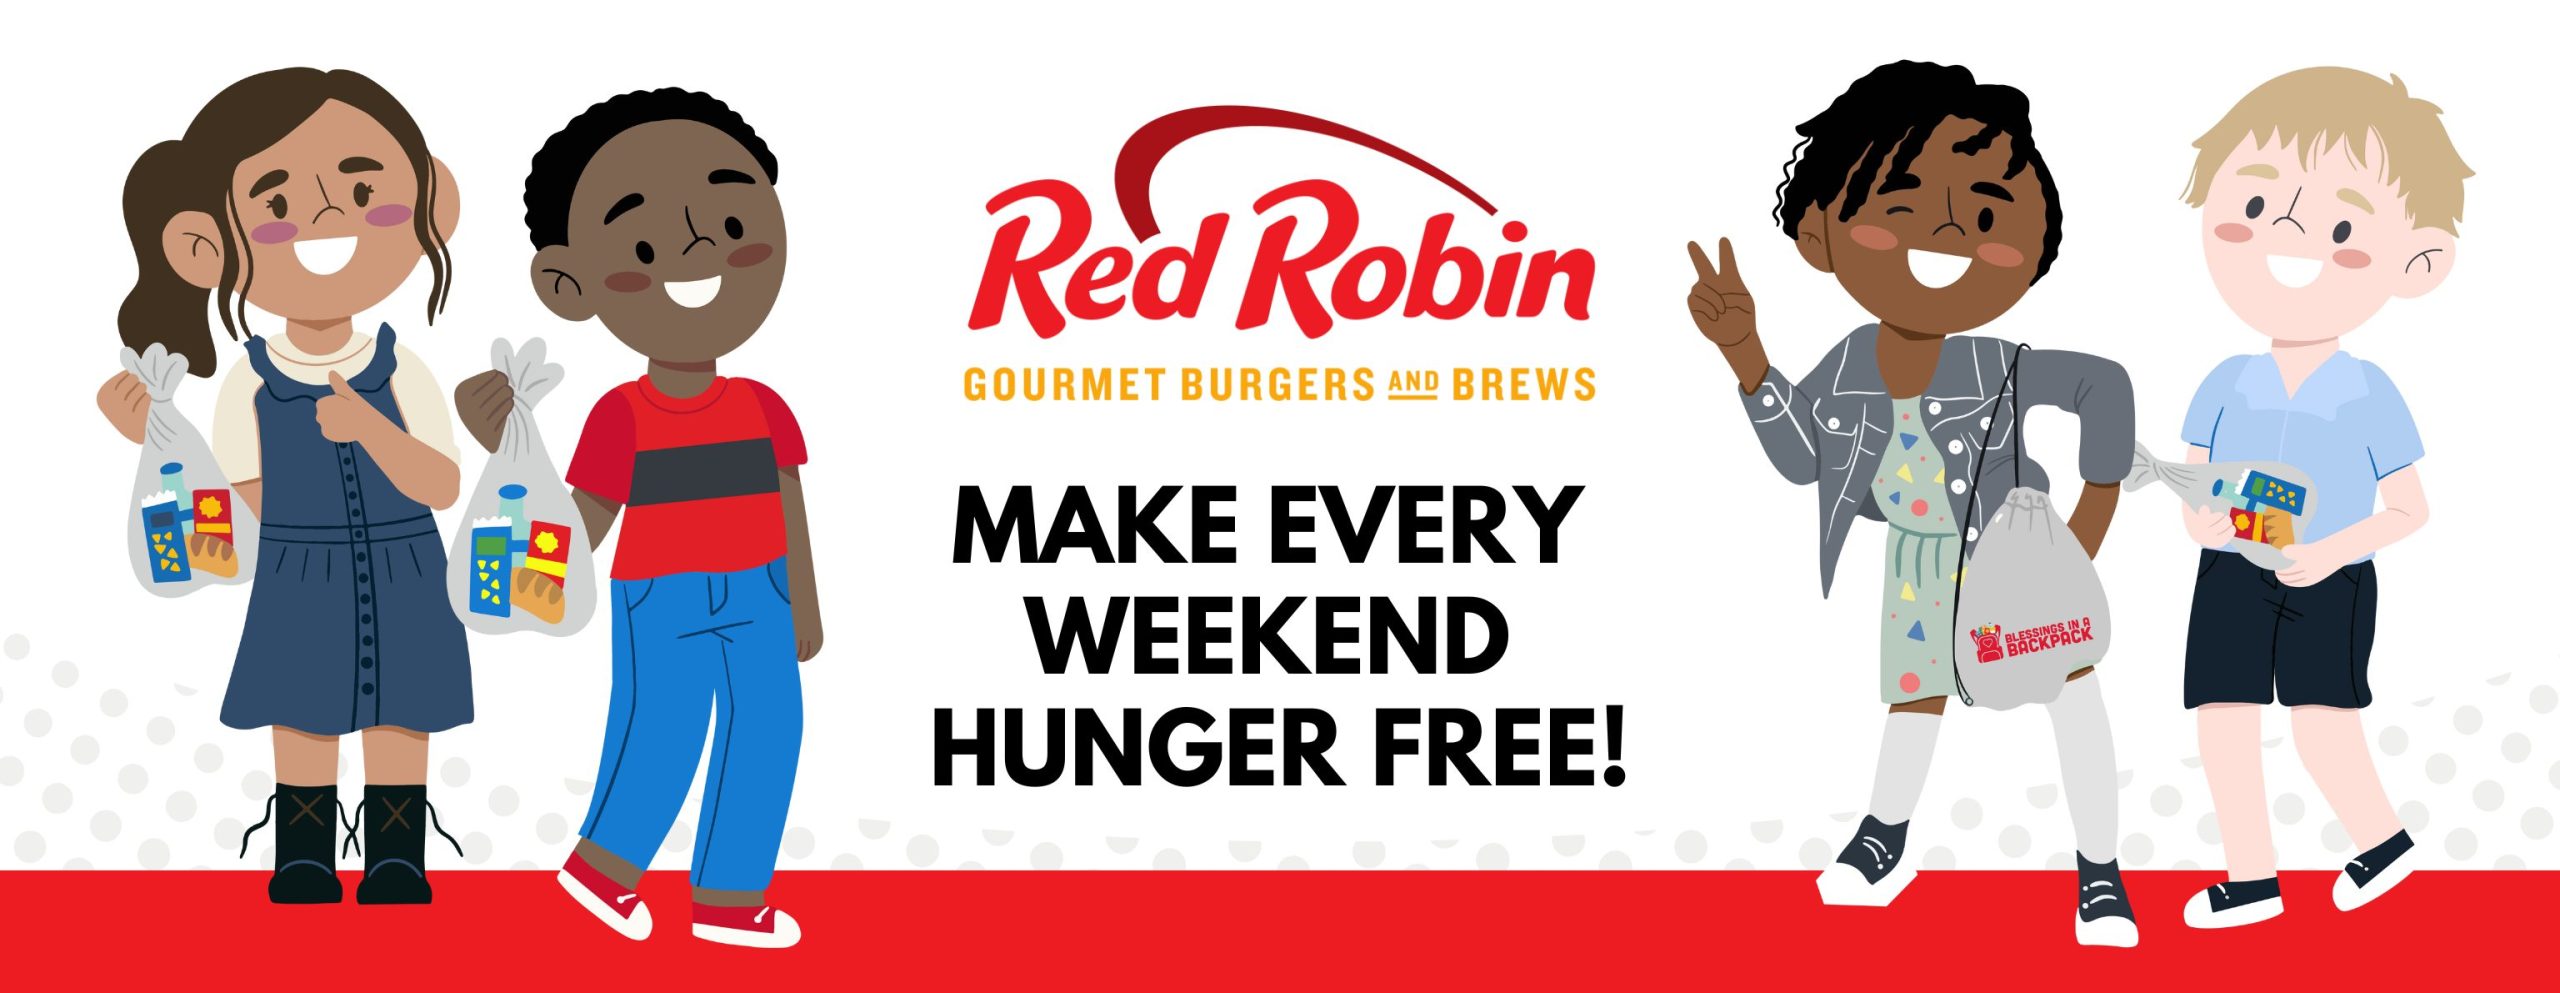 Red Robin Is Feeding Kids On the Weekends